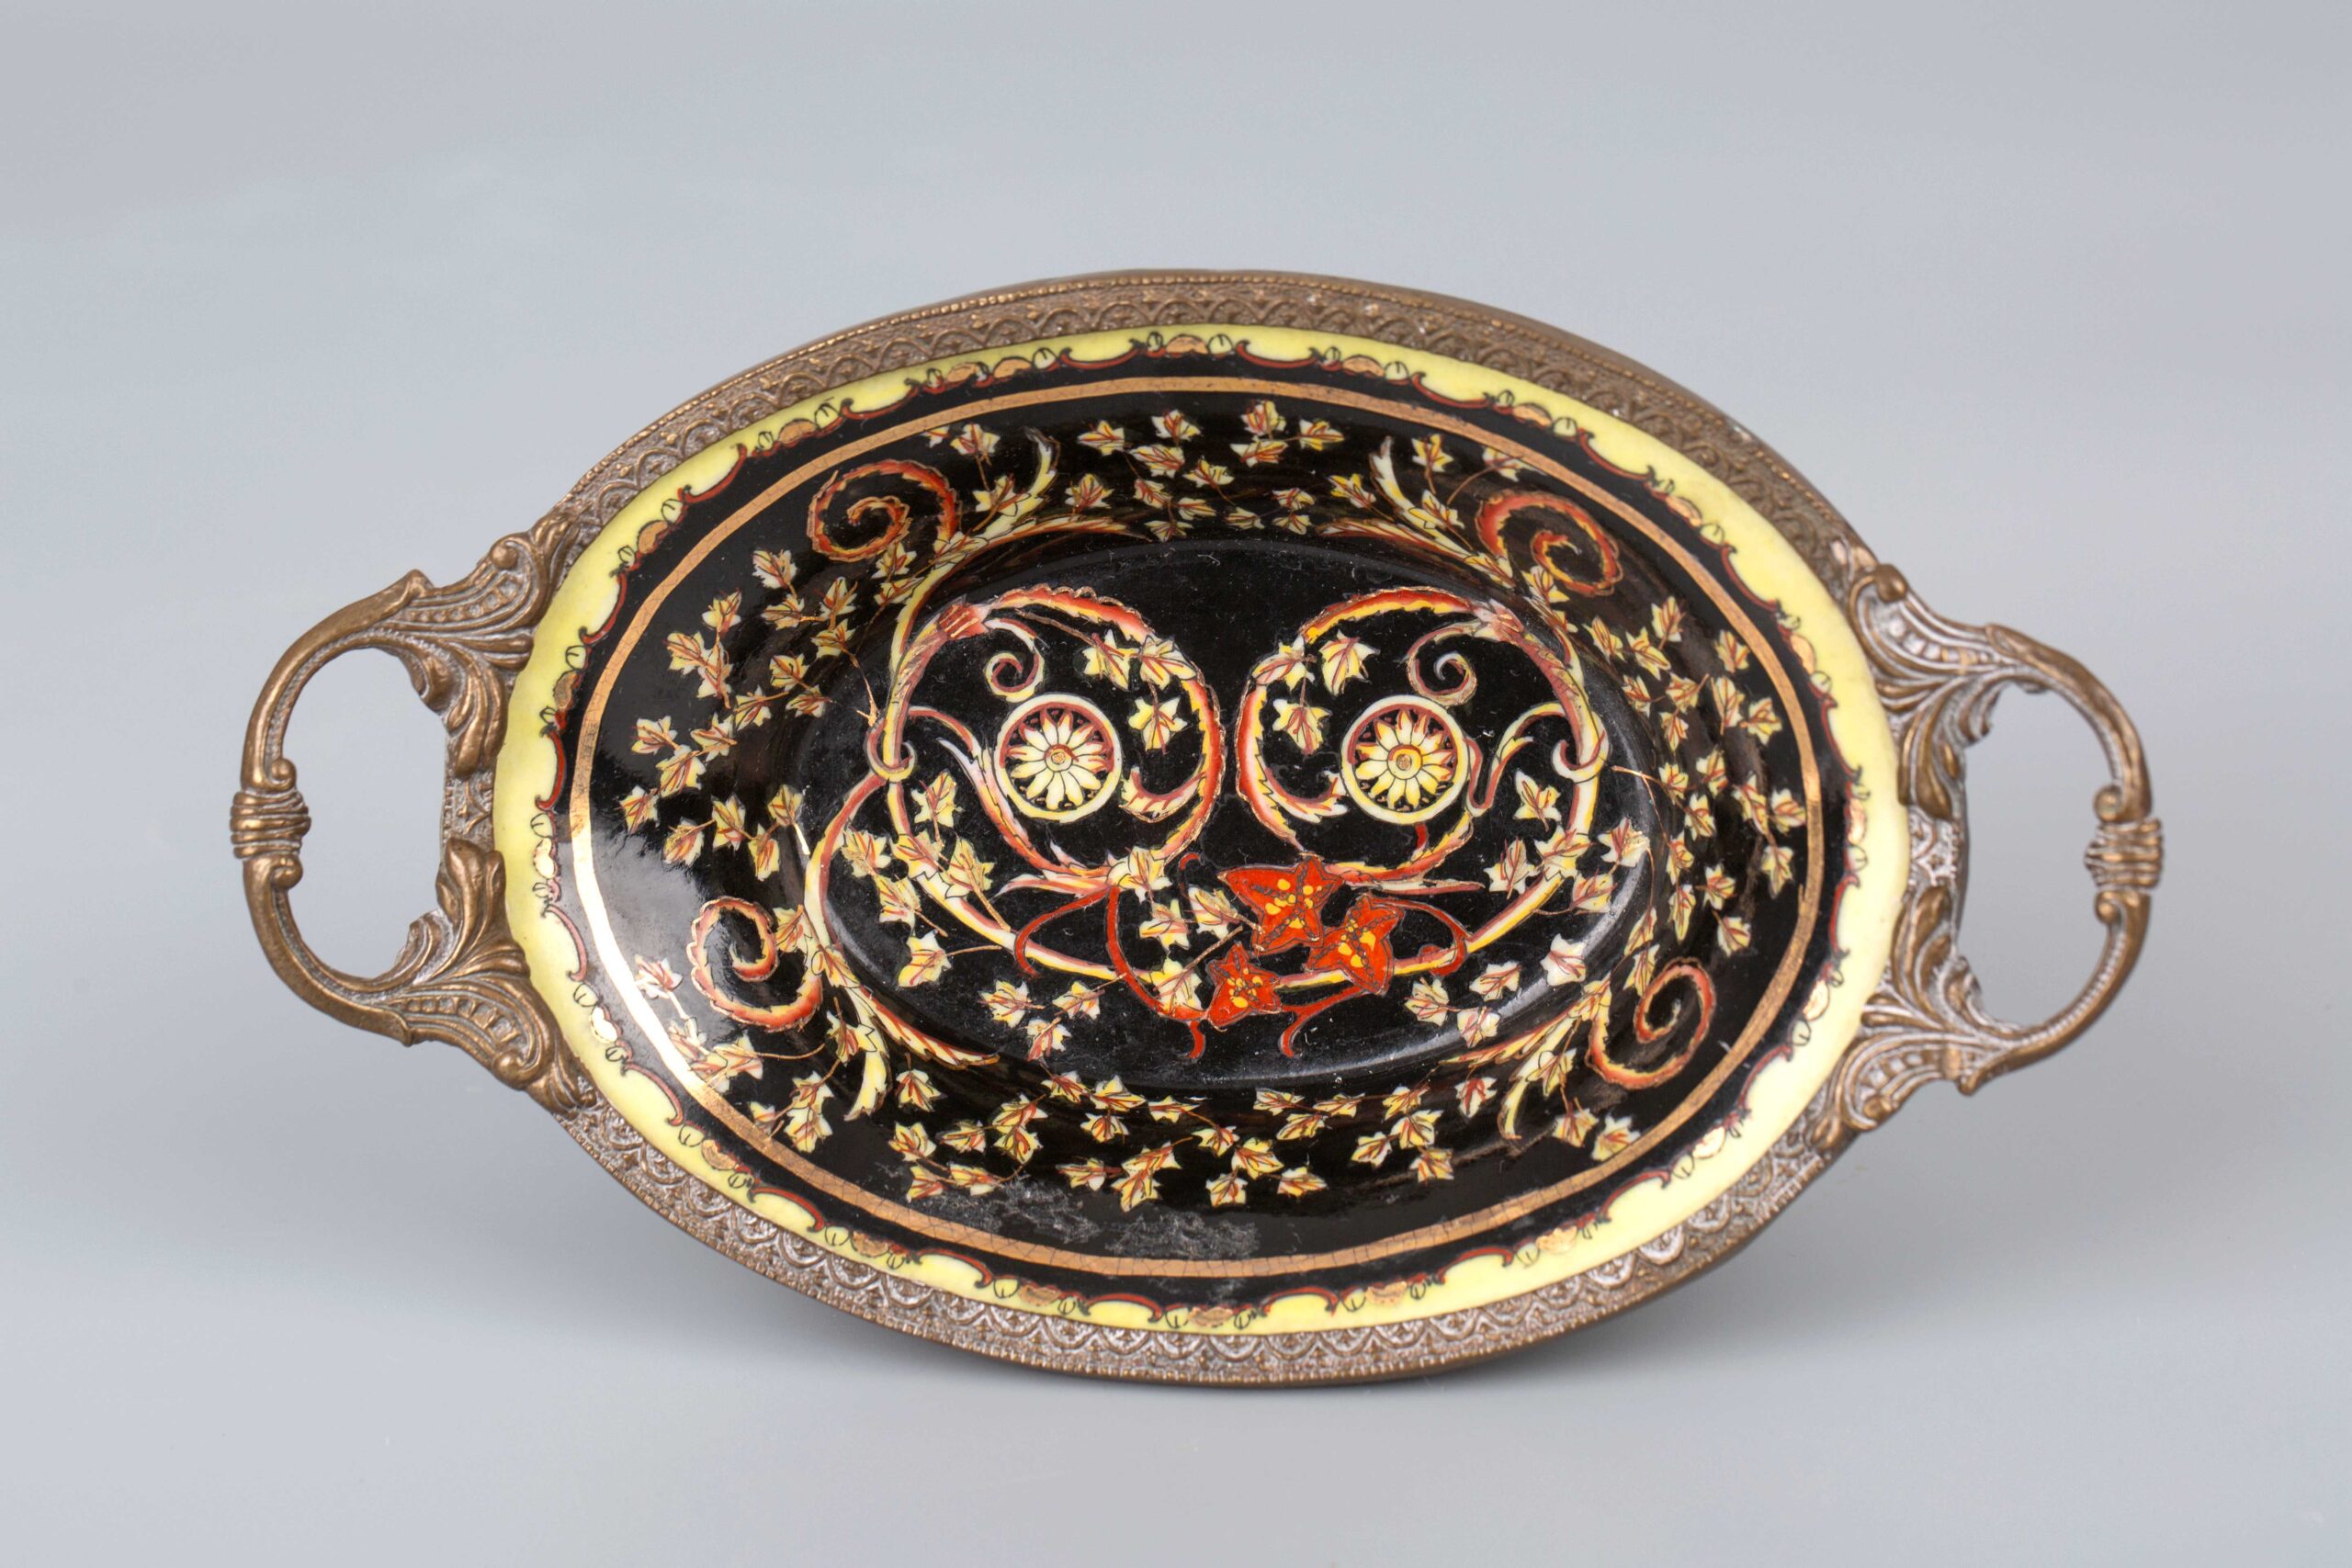 Flower pattern plate inlaind with bronze, Huarongtang Made mark 